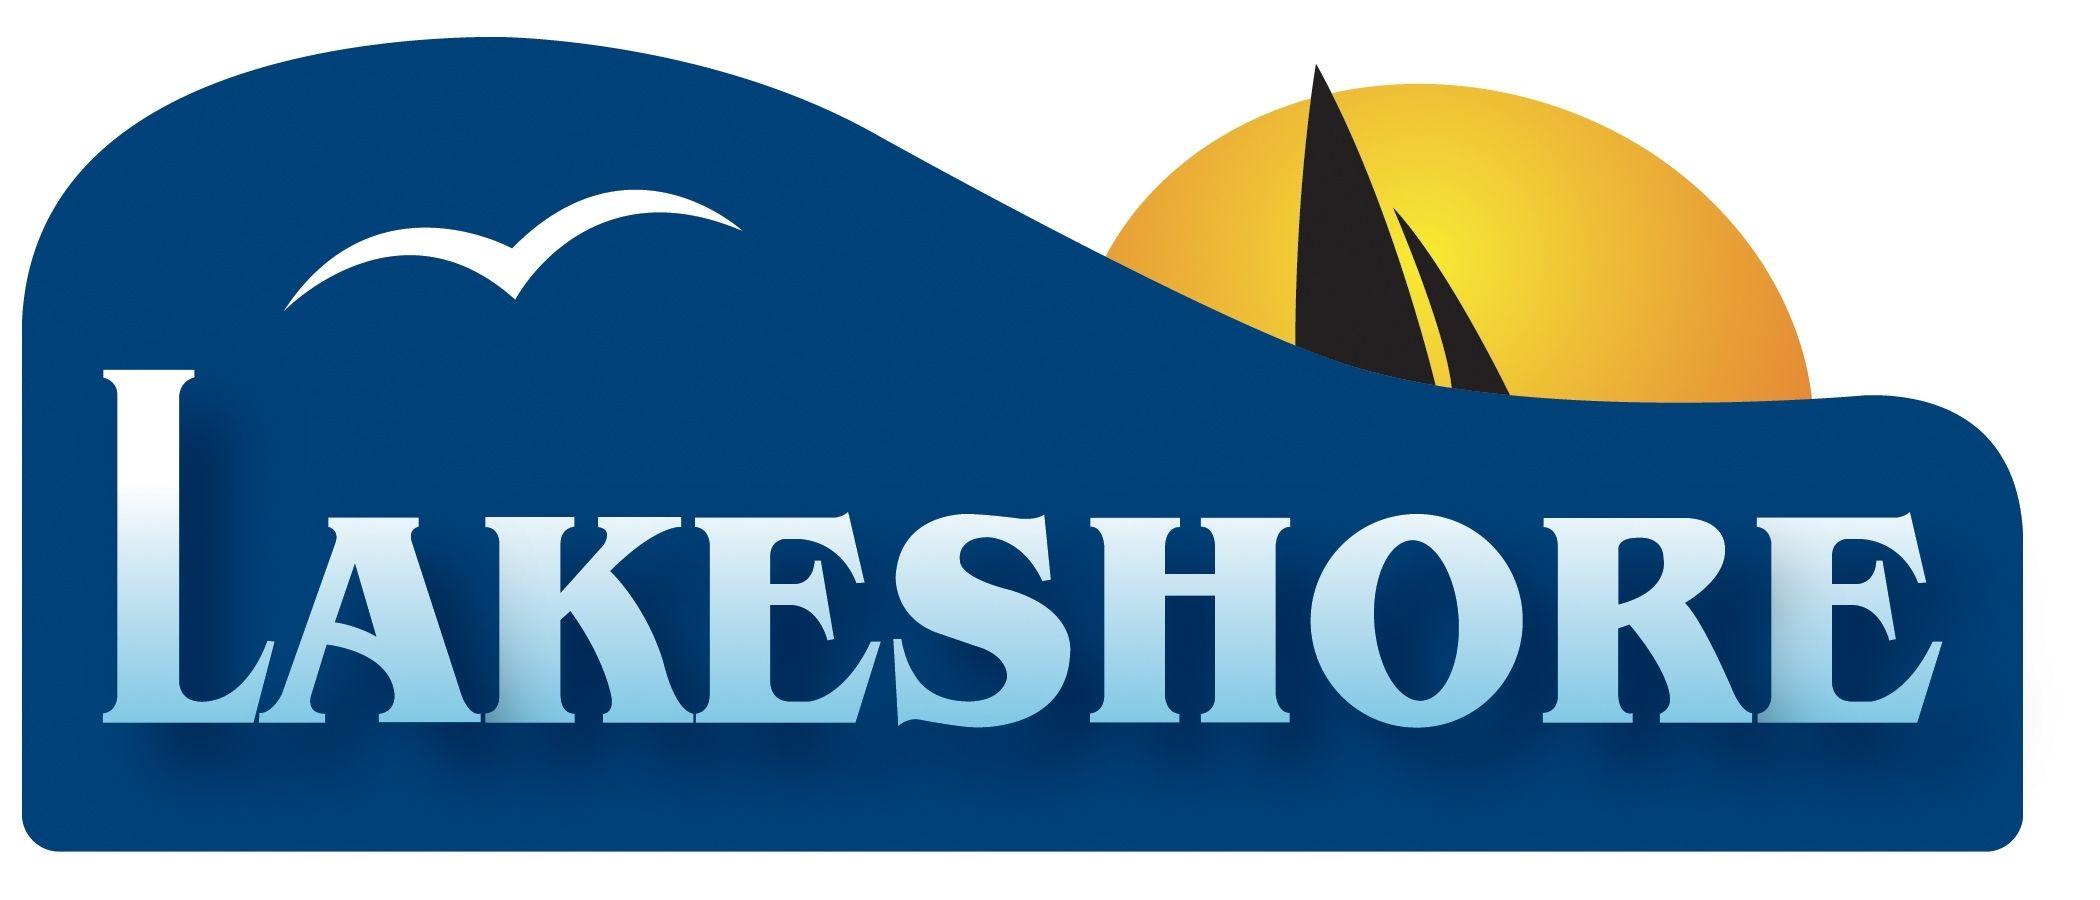 Lakeshore Logo - Lakeshore Paths and Trails - CWATS